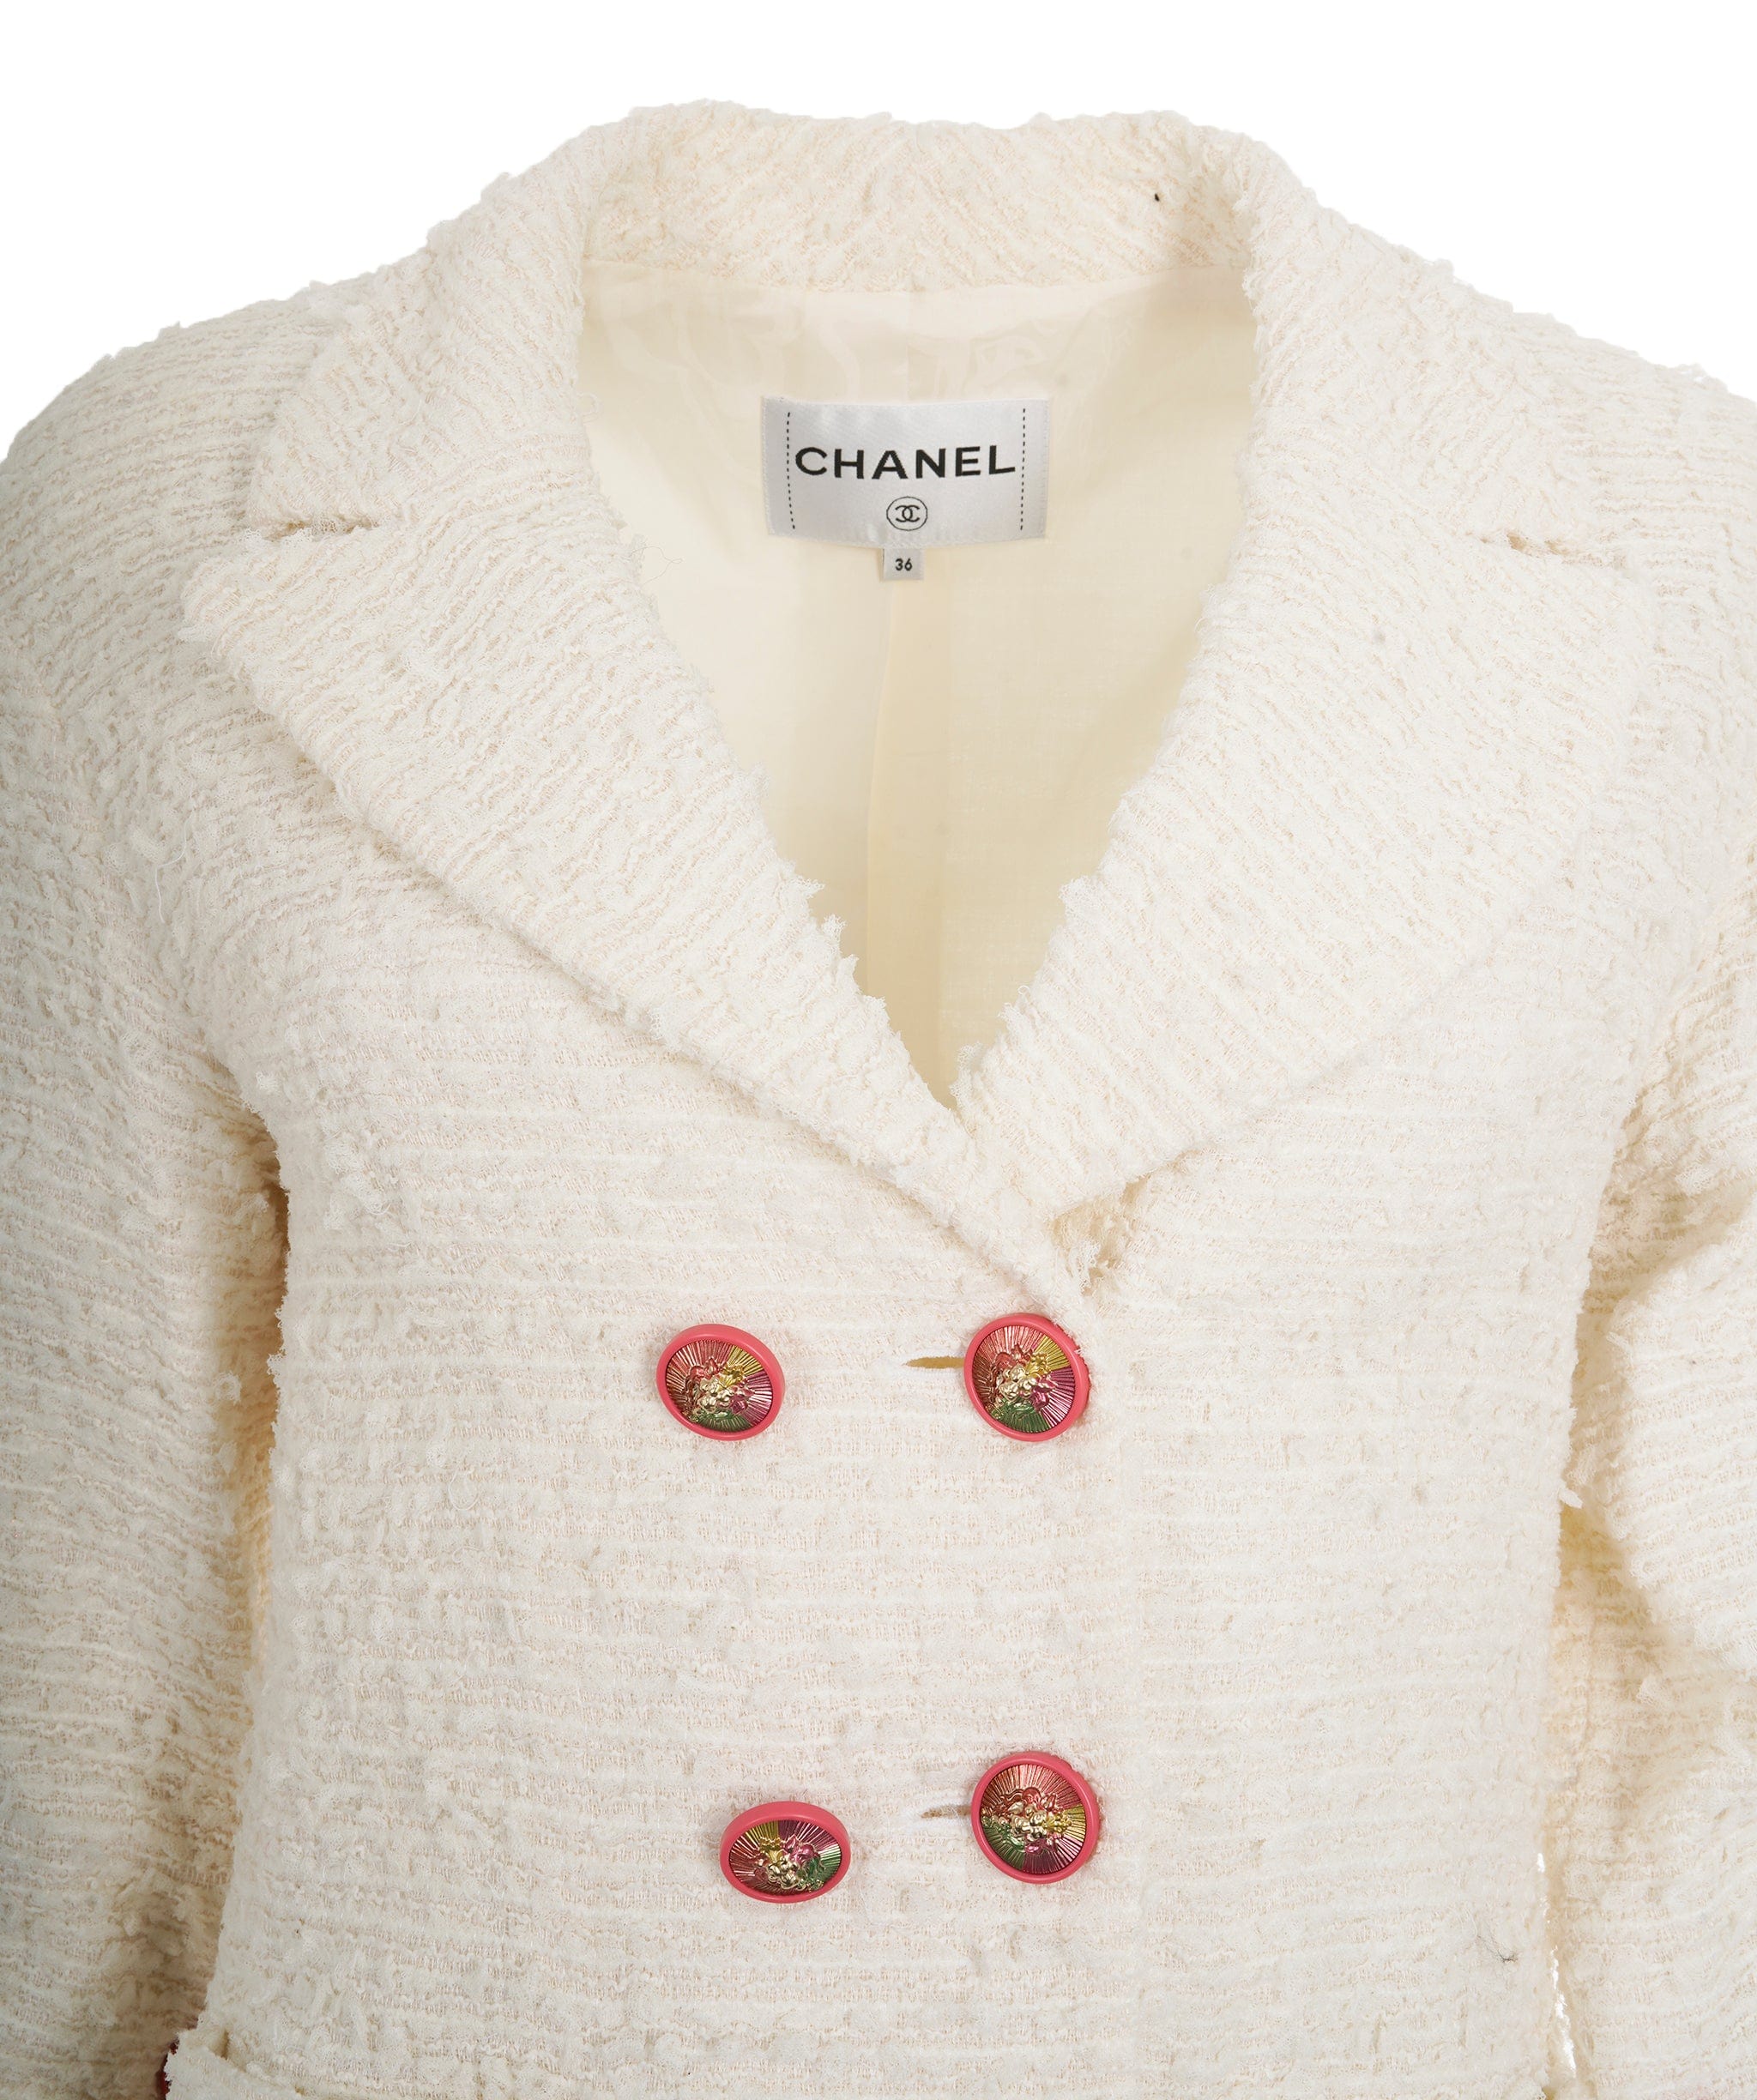 Chanel Chanel white tweed jacket pink buttons FR36 P56016V29319 AVC1965